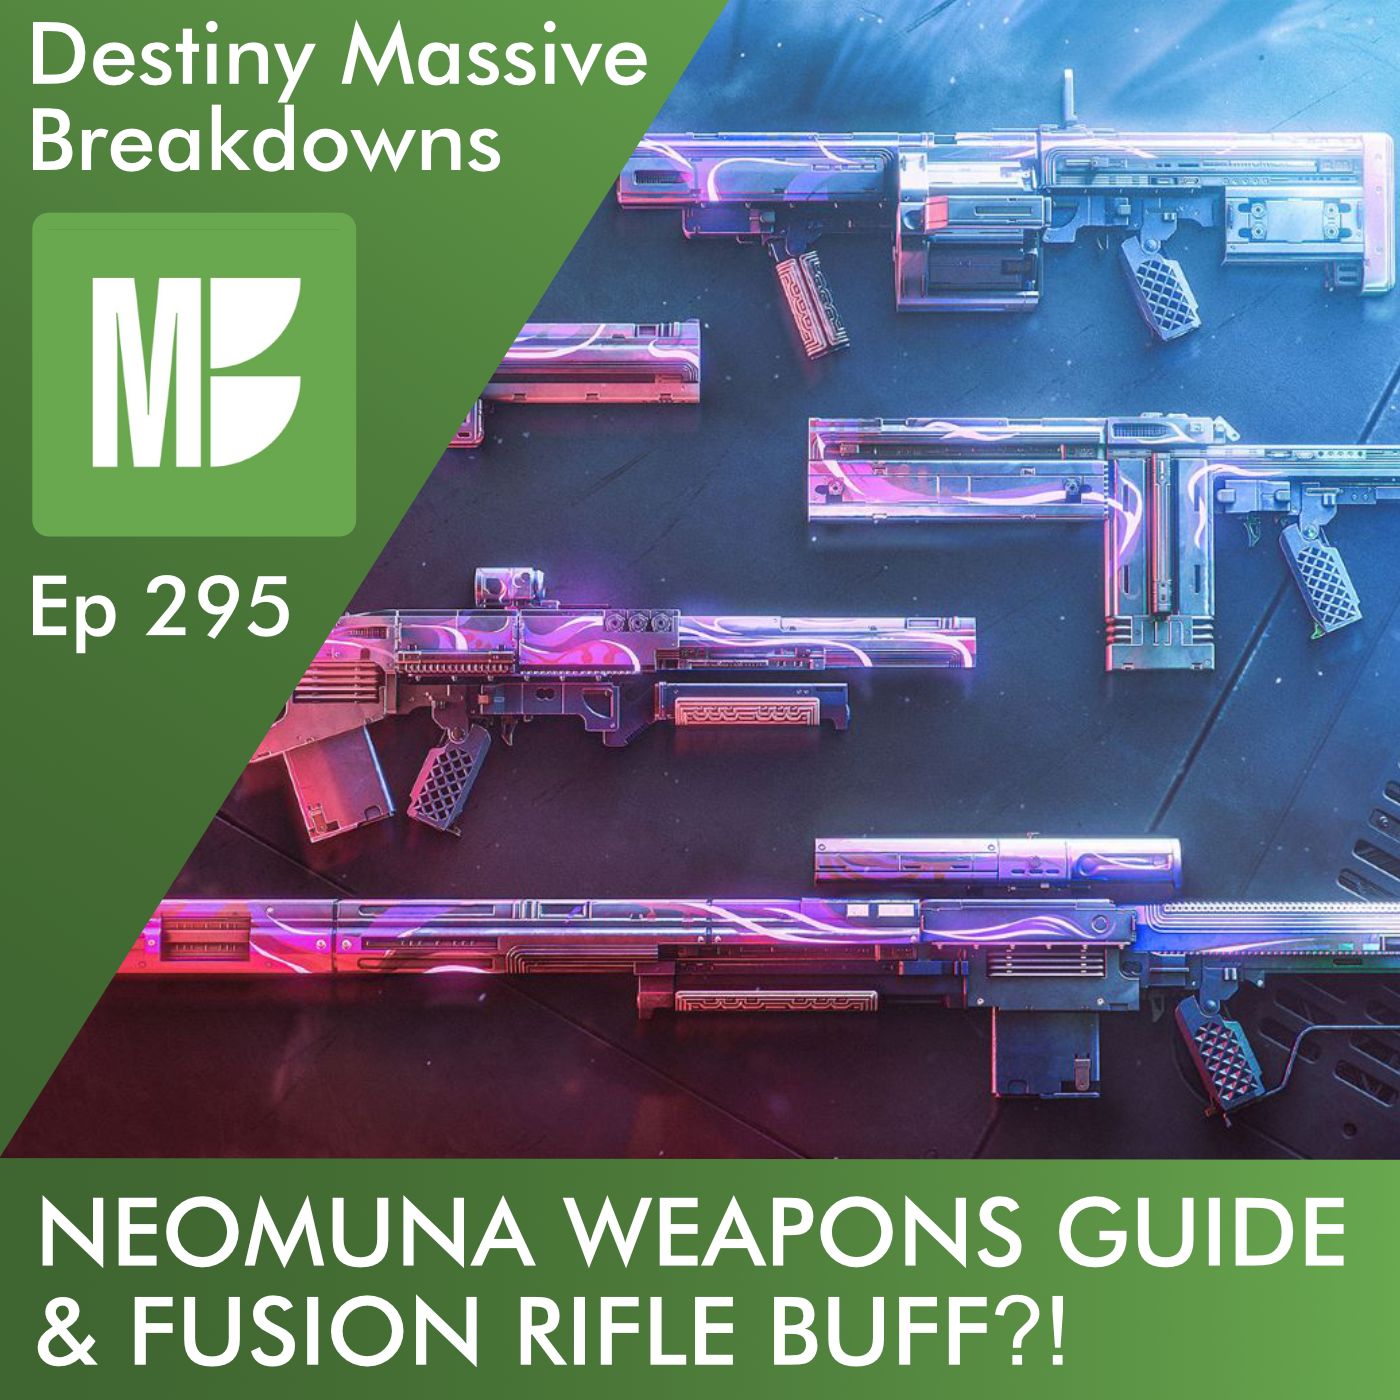 Ep 295: Neomuna Weapons Guide - Ft. Fusion Rifle Buff?!